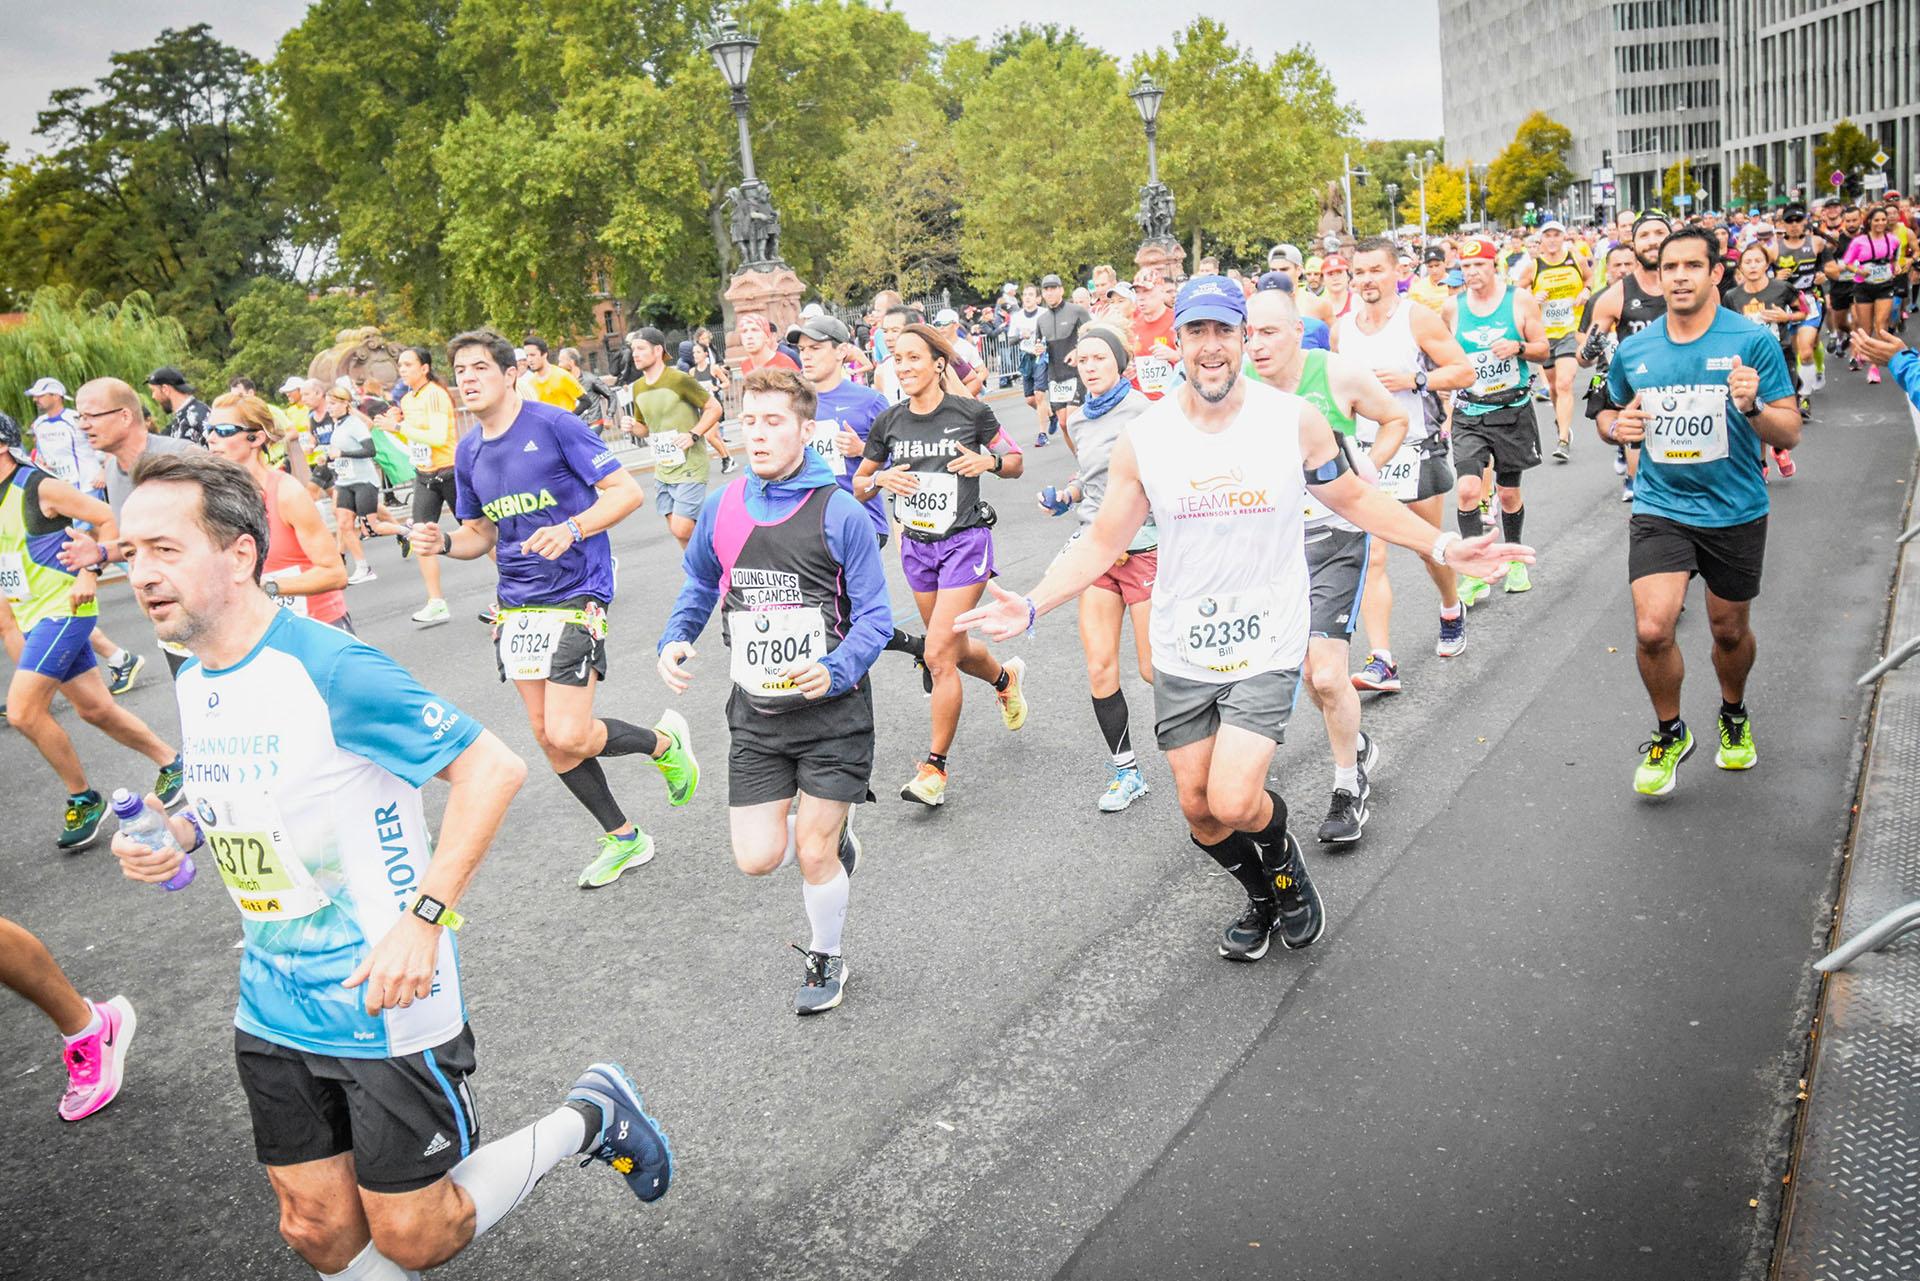 Wilmette resident Bill Bucklew, in the Team Fox tank top above, ran in the Berlin marathon on Sept. 29, 2019. Bucklew, who was diagnosed with Parkinson’s disease at age 43, will run in the Chicago marathon on Sunday, Oct. 13. (Courtesy of Bill Bucklew)